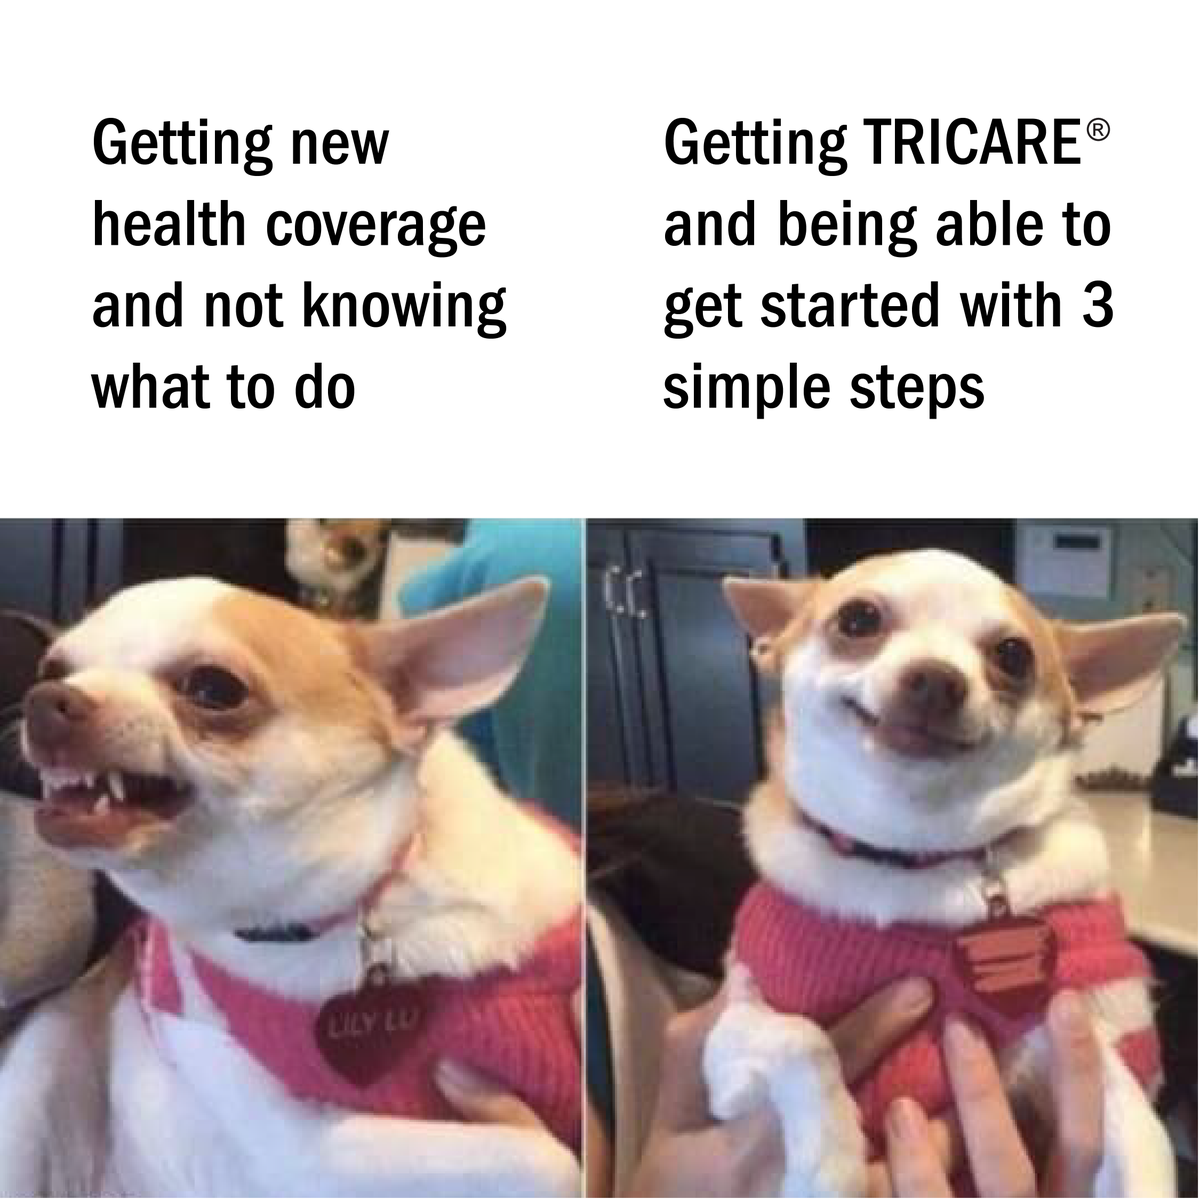 Are you new to TRICARE? Get started with these three simple steps: 1. Confirm your eligibility online using the milConnect portal 2. Use TRICARE’s Plan Finder tool to pick a plan 3. Decide what plan is right for you and enroll Learn more at: tricare.mil/New